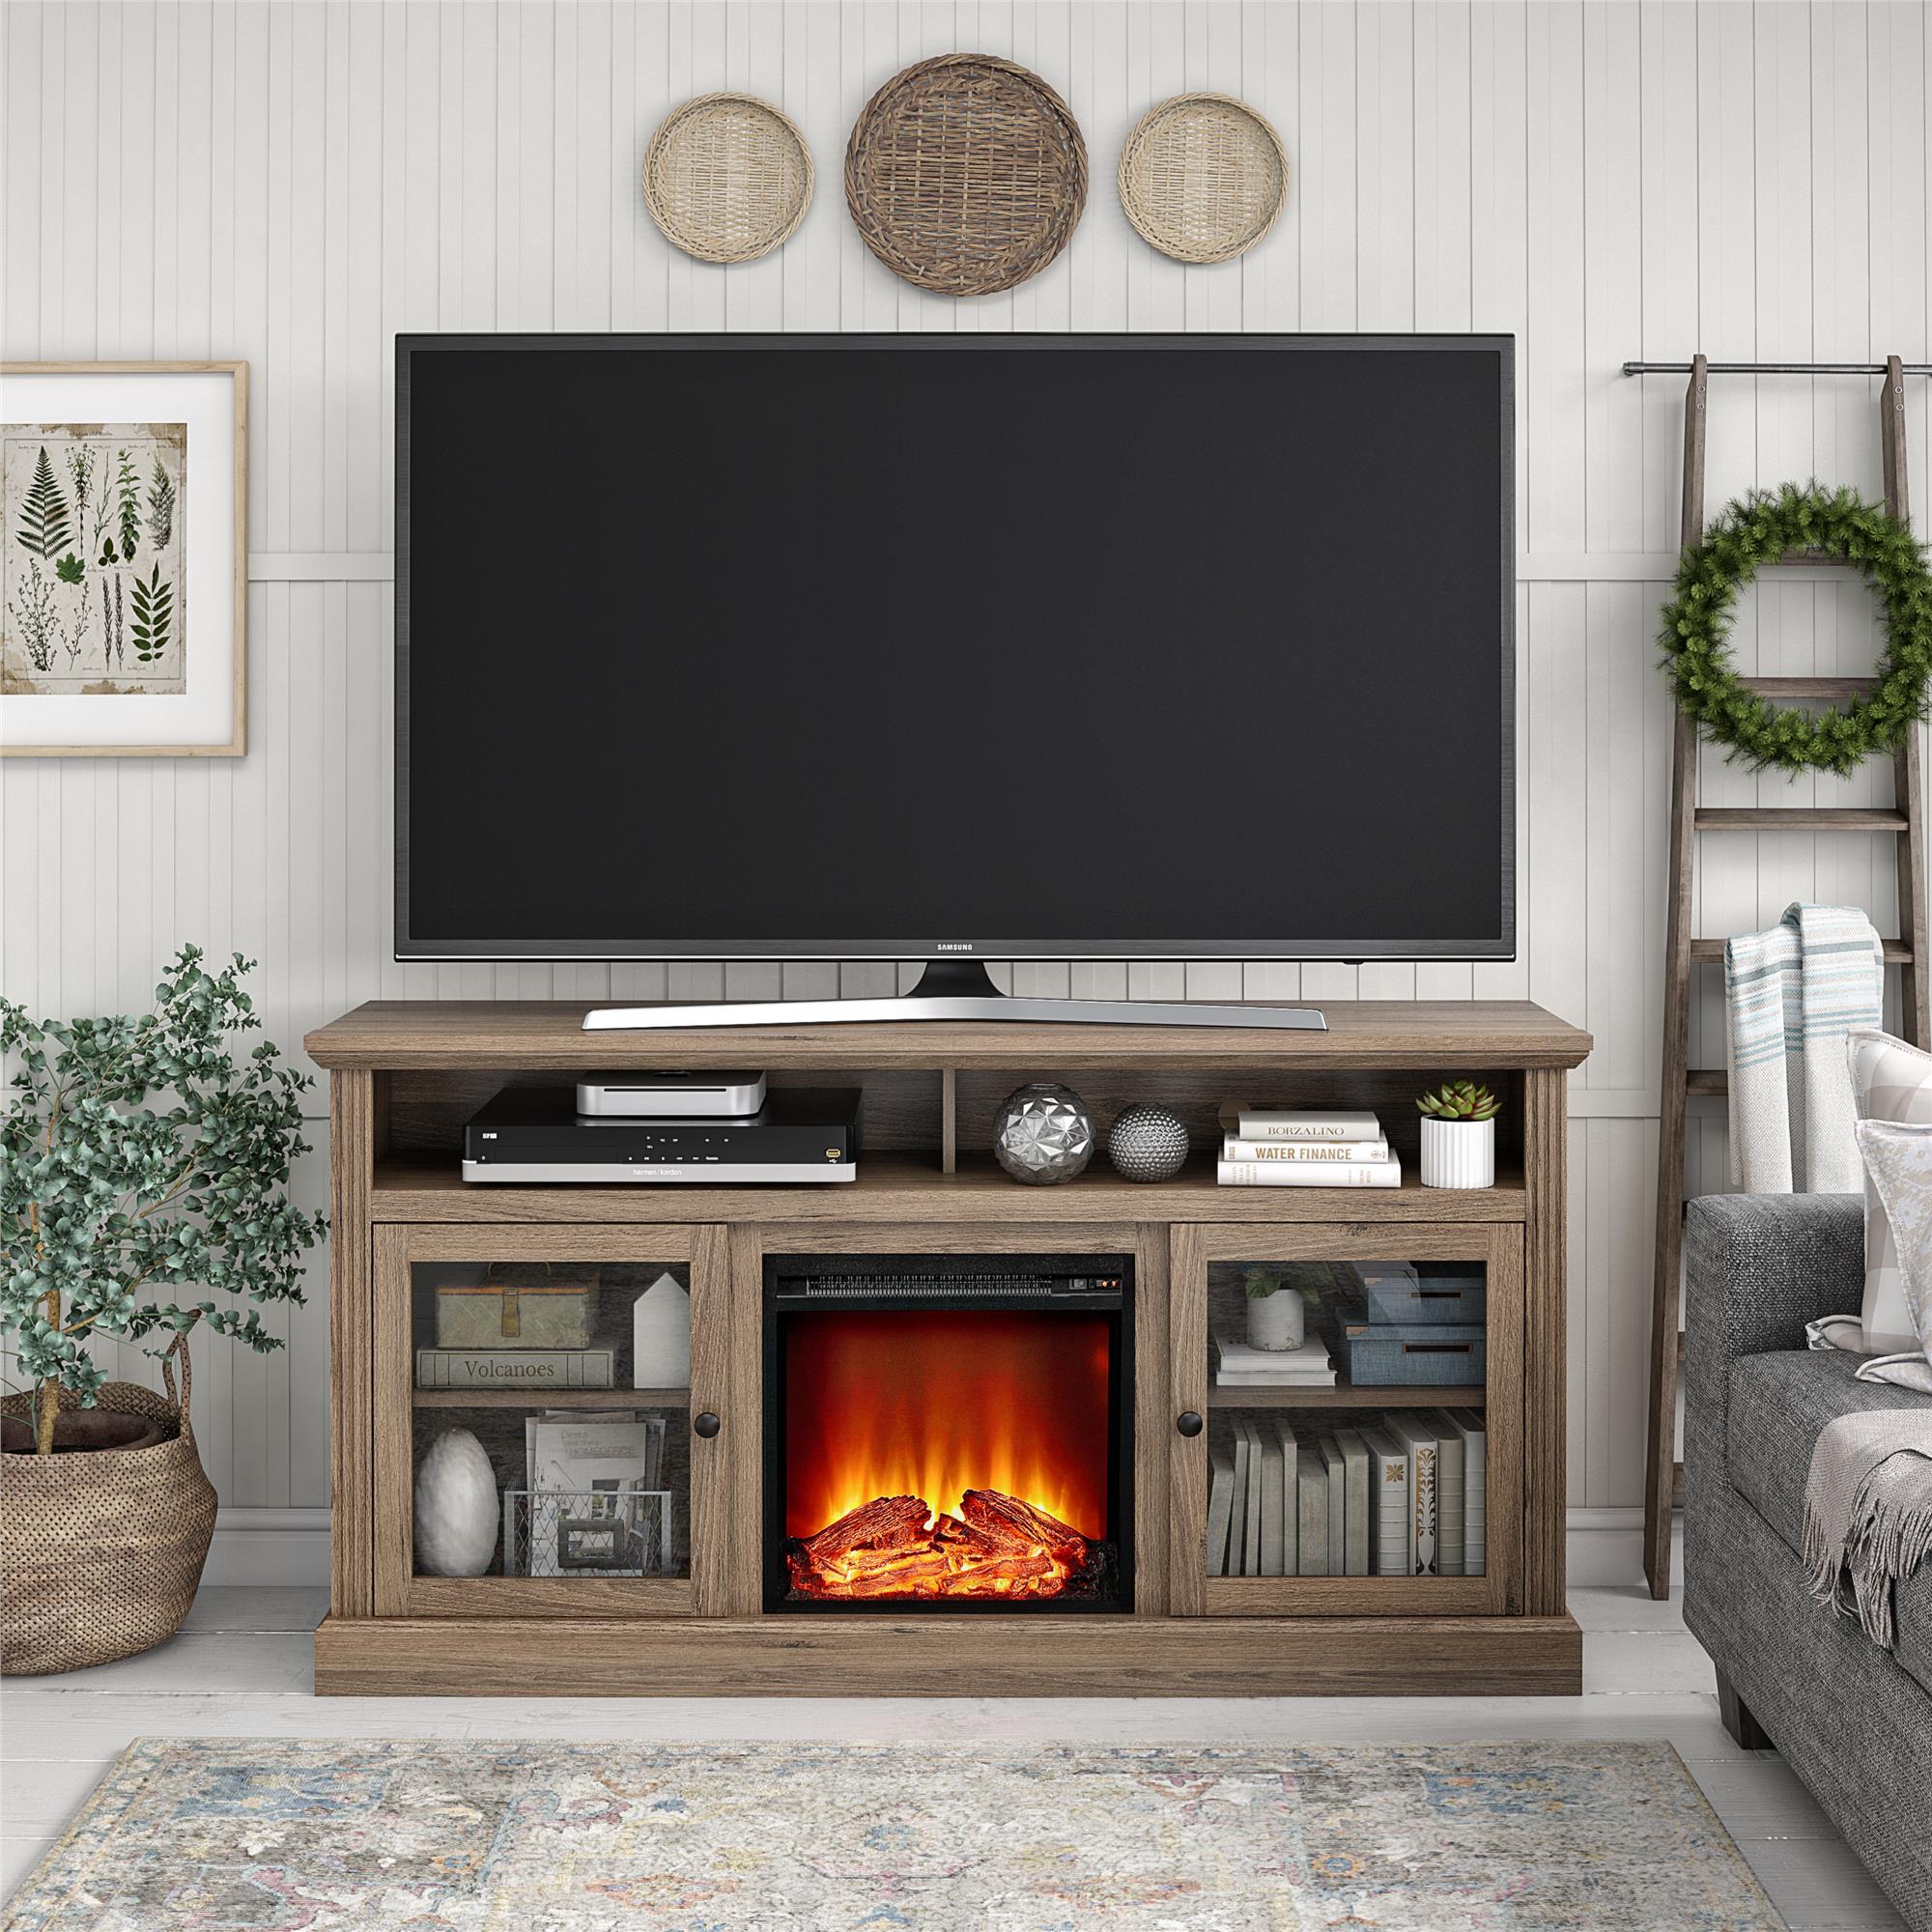 Ameriwood Home Leesburg Fireplace TV Stand for TVs up to 65", Rustic Oak - image 1 of 9